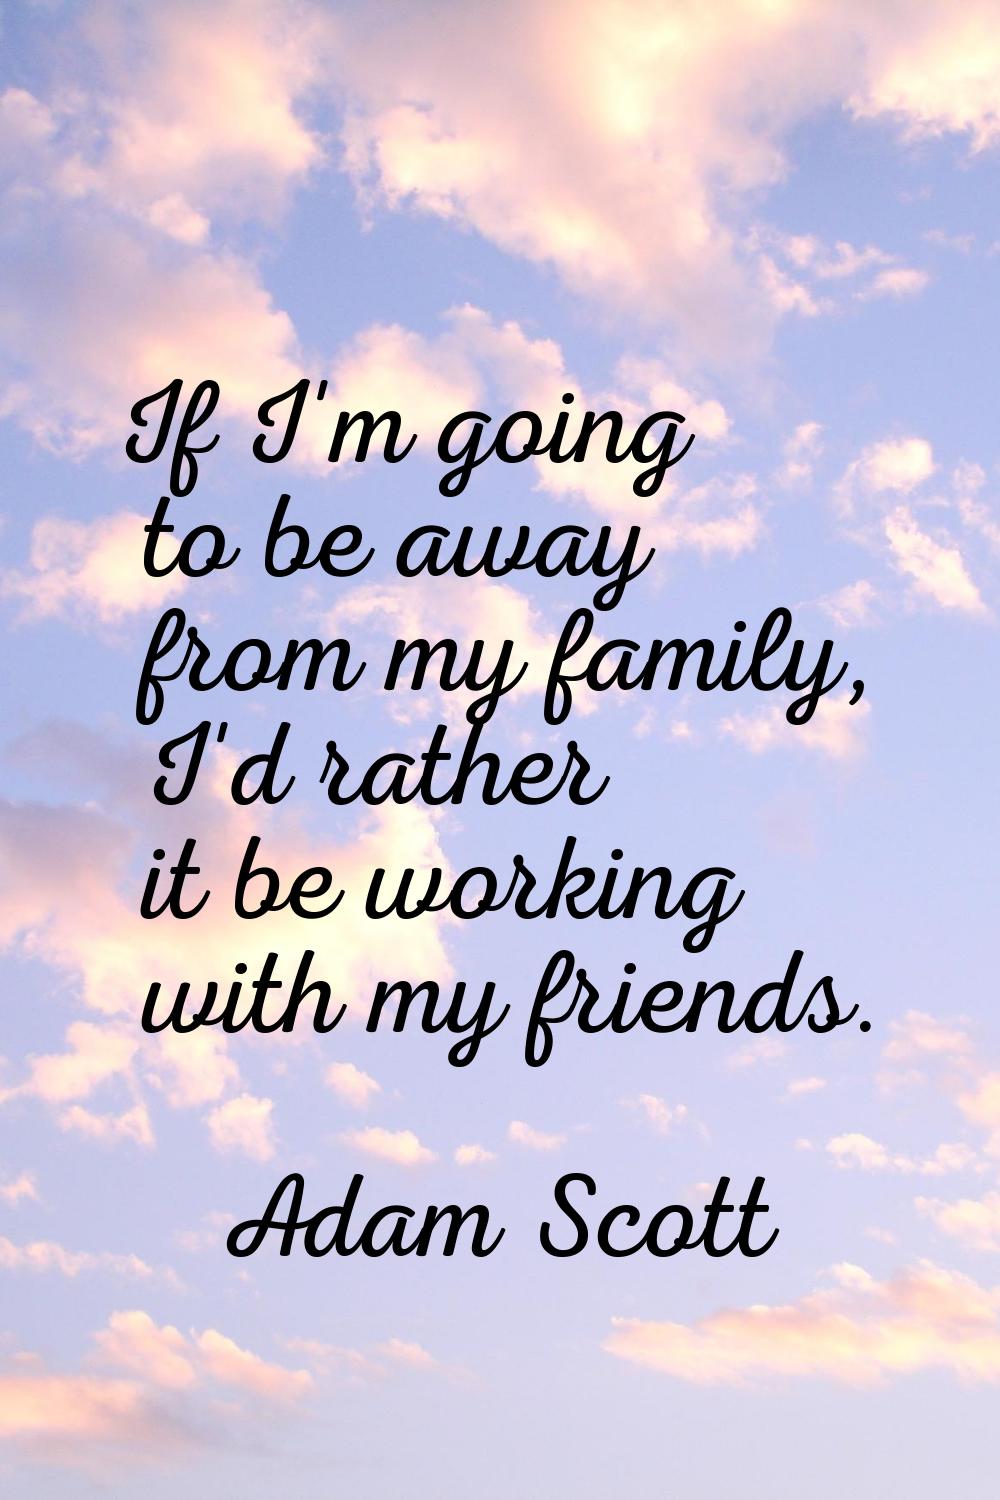 If I'm going to be away from my family, I'd rather it be working with my friends.